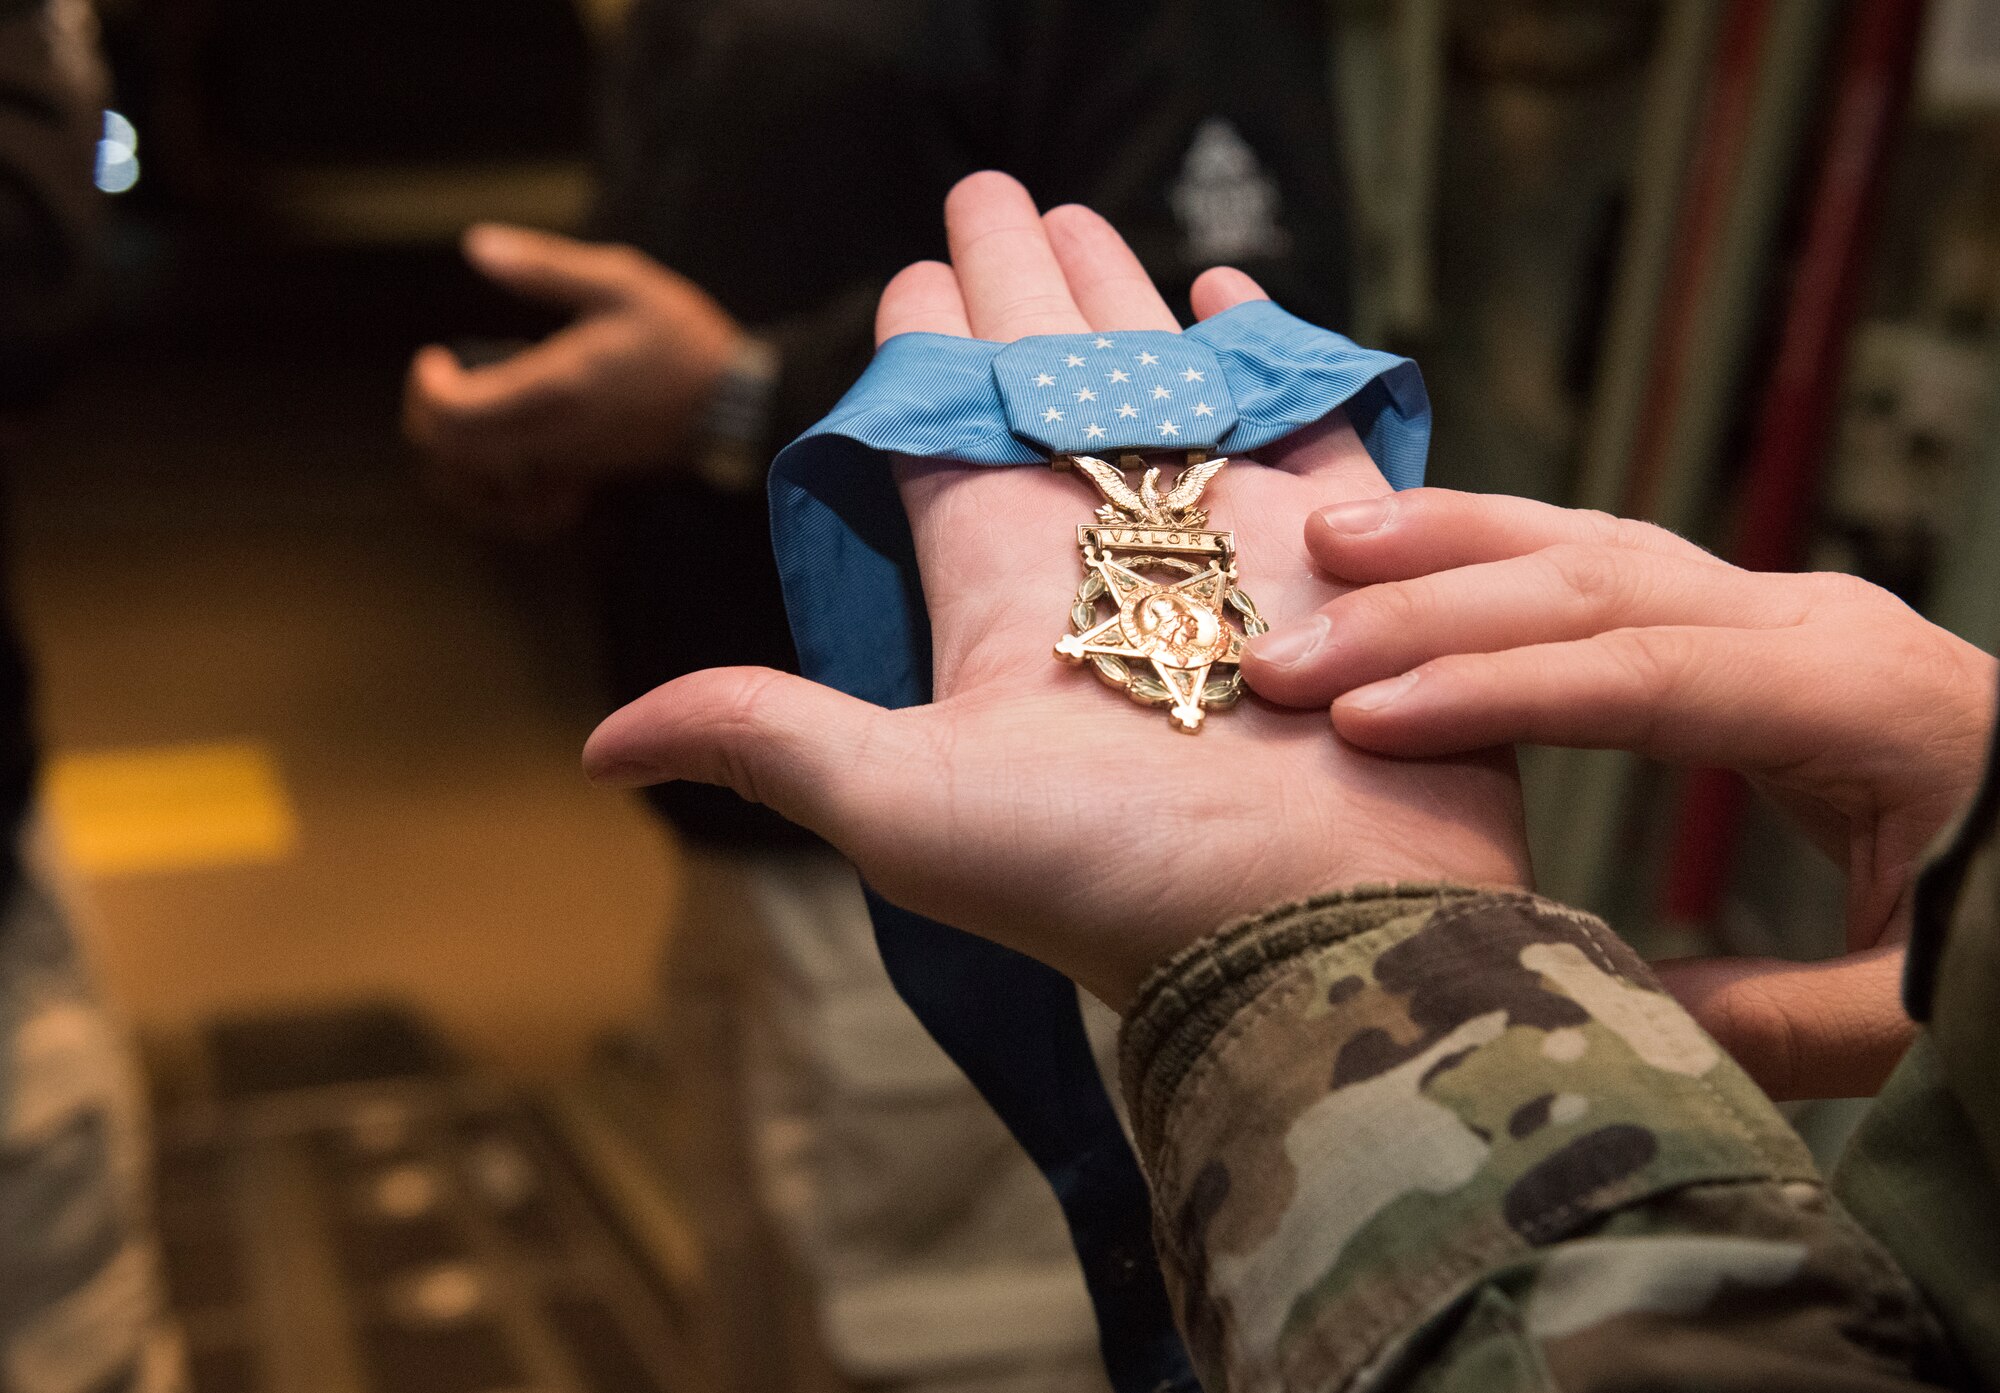 U.S. Air Force Senior Airman Terry Kularski, 86th Aircraft Maintenance Squadron hydraulic system specialist, holds a medal of honor awarded to retired U.S. Army Master Segt. Leroy Petry, wounded warrior, at Ramstein Air Base, Germany, Jan. 13, 2020. While assigned to the 75th Ranger Regiment, Petry suffered combat wounds, including a gunshot to his thighs and an enemy grenade explosion in-hand. Petry is currently working as a military liaison for Troops First Foundation, is vice president of the Medal of Honor Society, and an ambassador for the president of the United States executive order for suicide prevention.